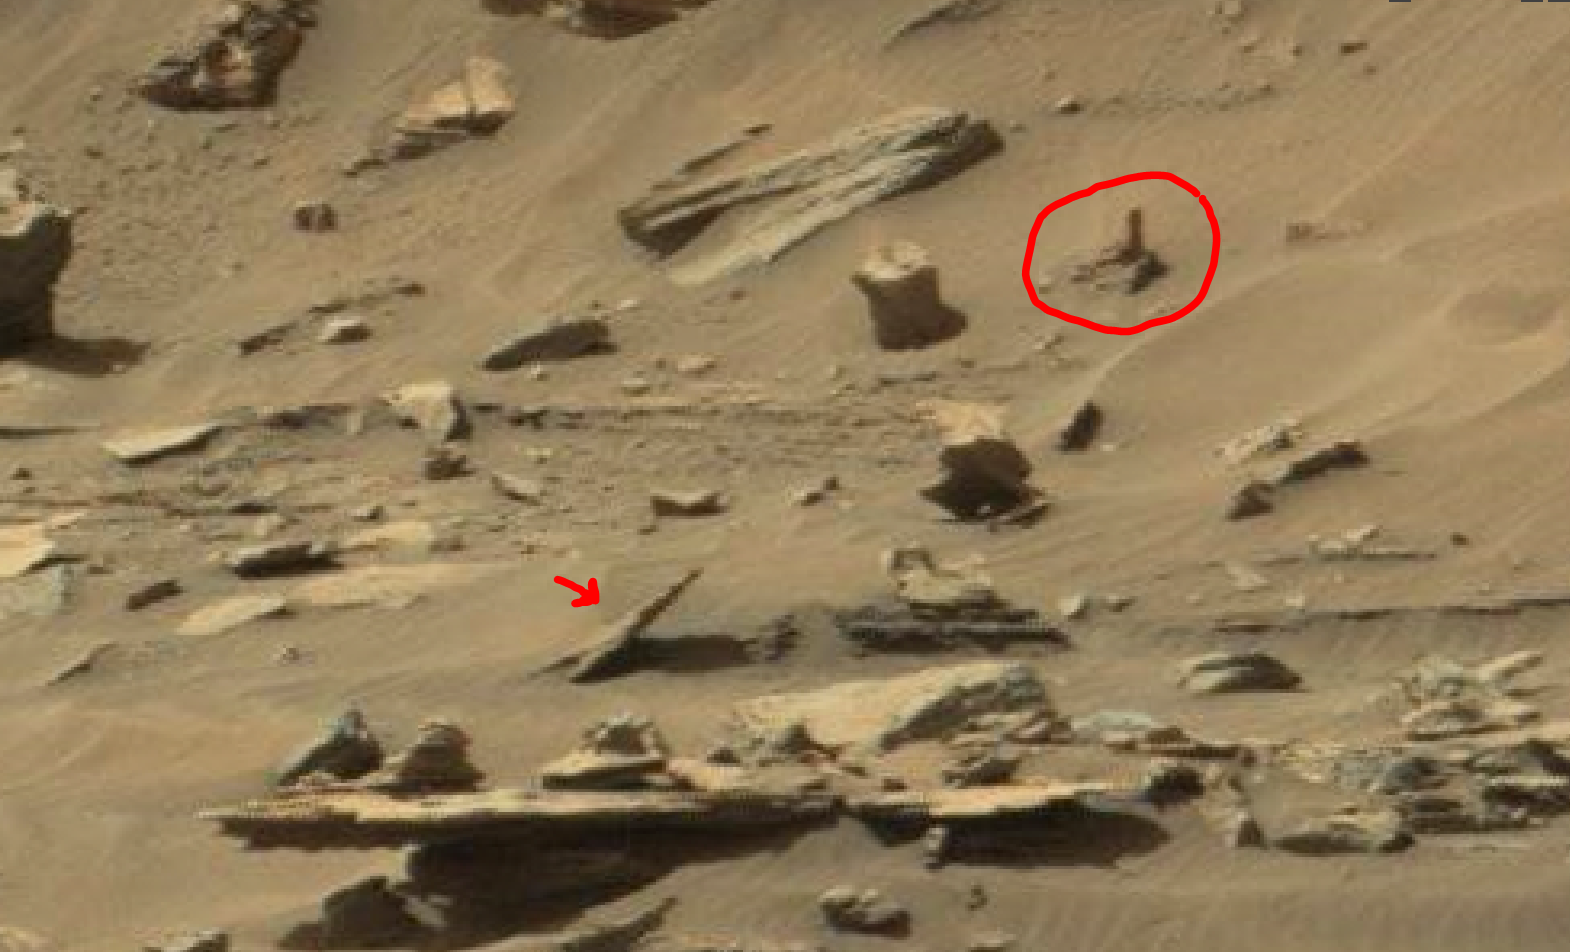 mars sol 1429 anomaly artifacts 5 was life on mars